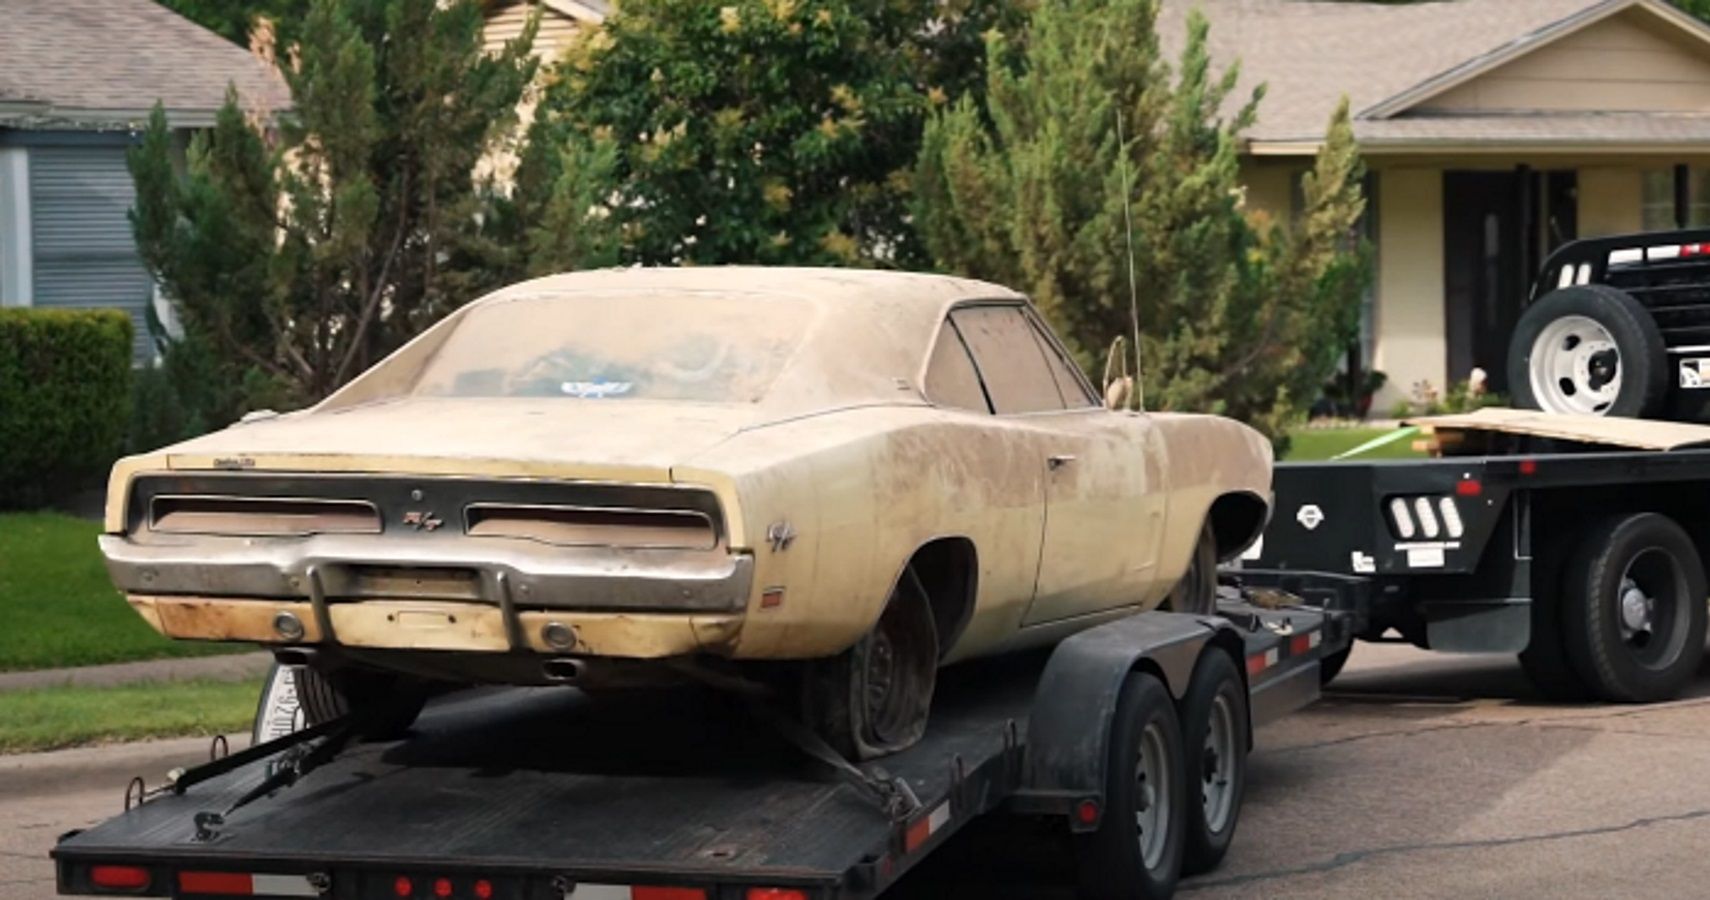  1969 Dodge Charger R/T on a trailer